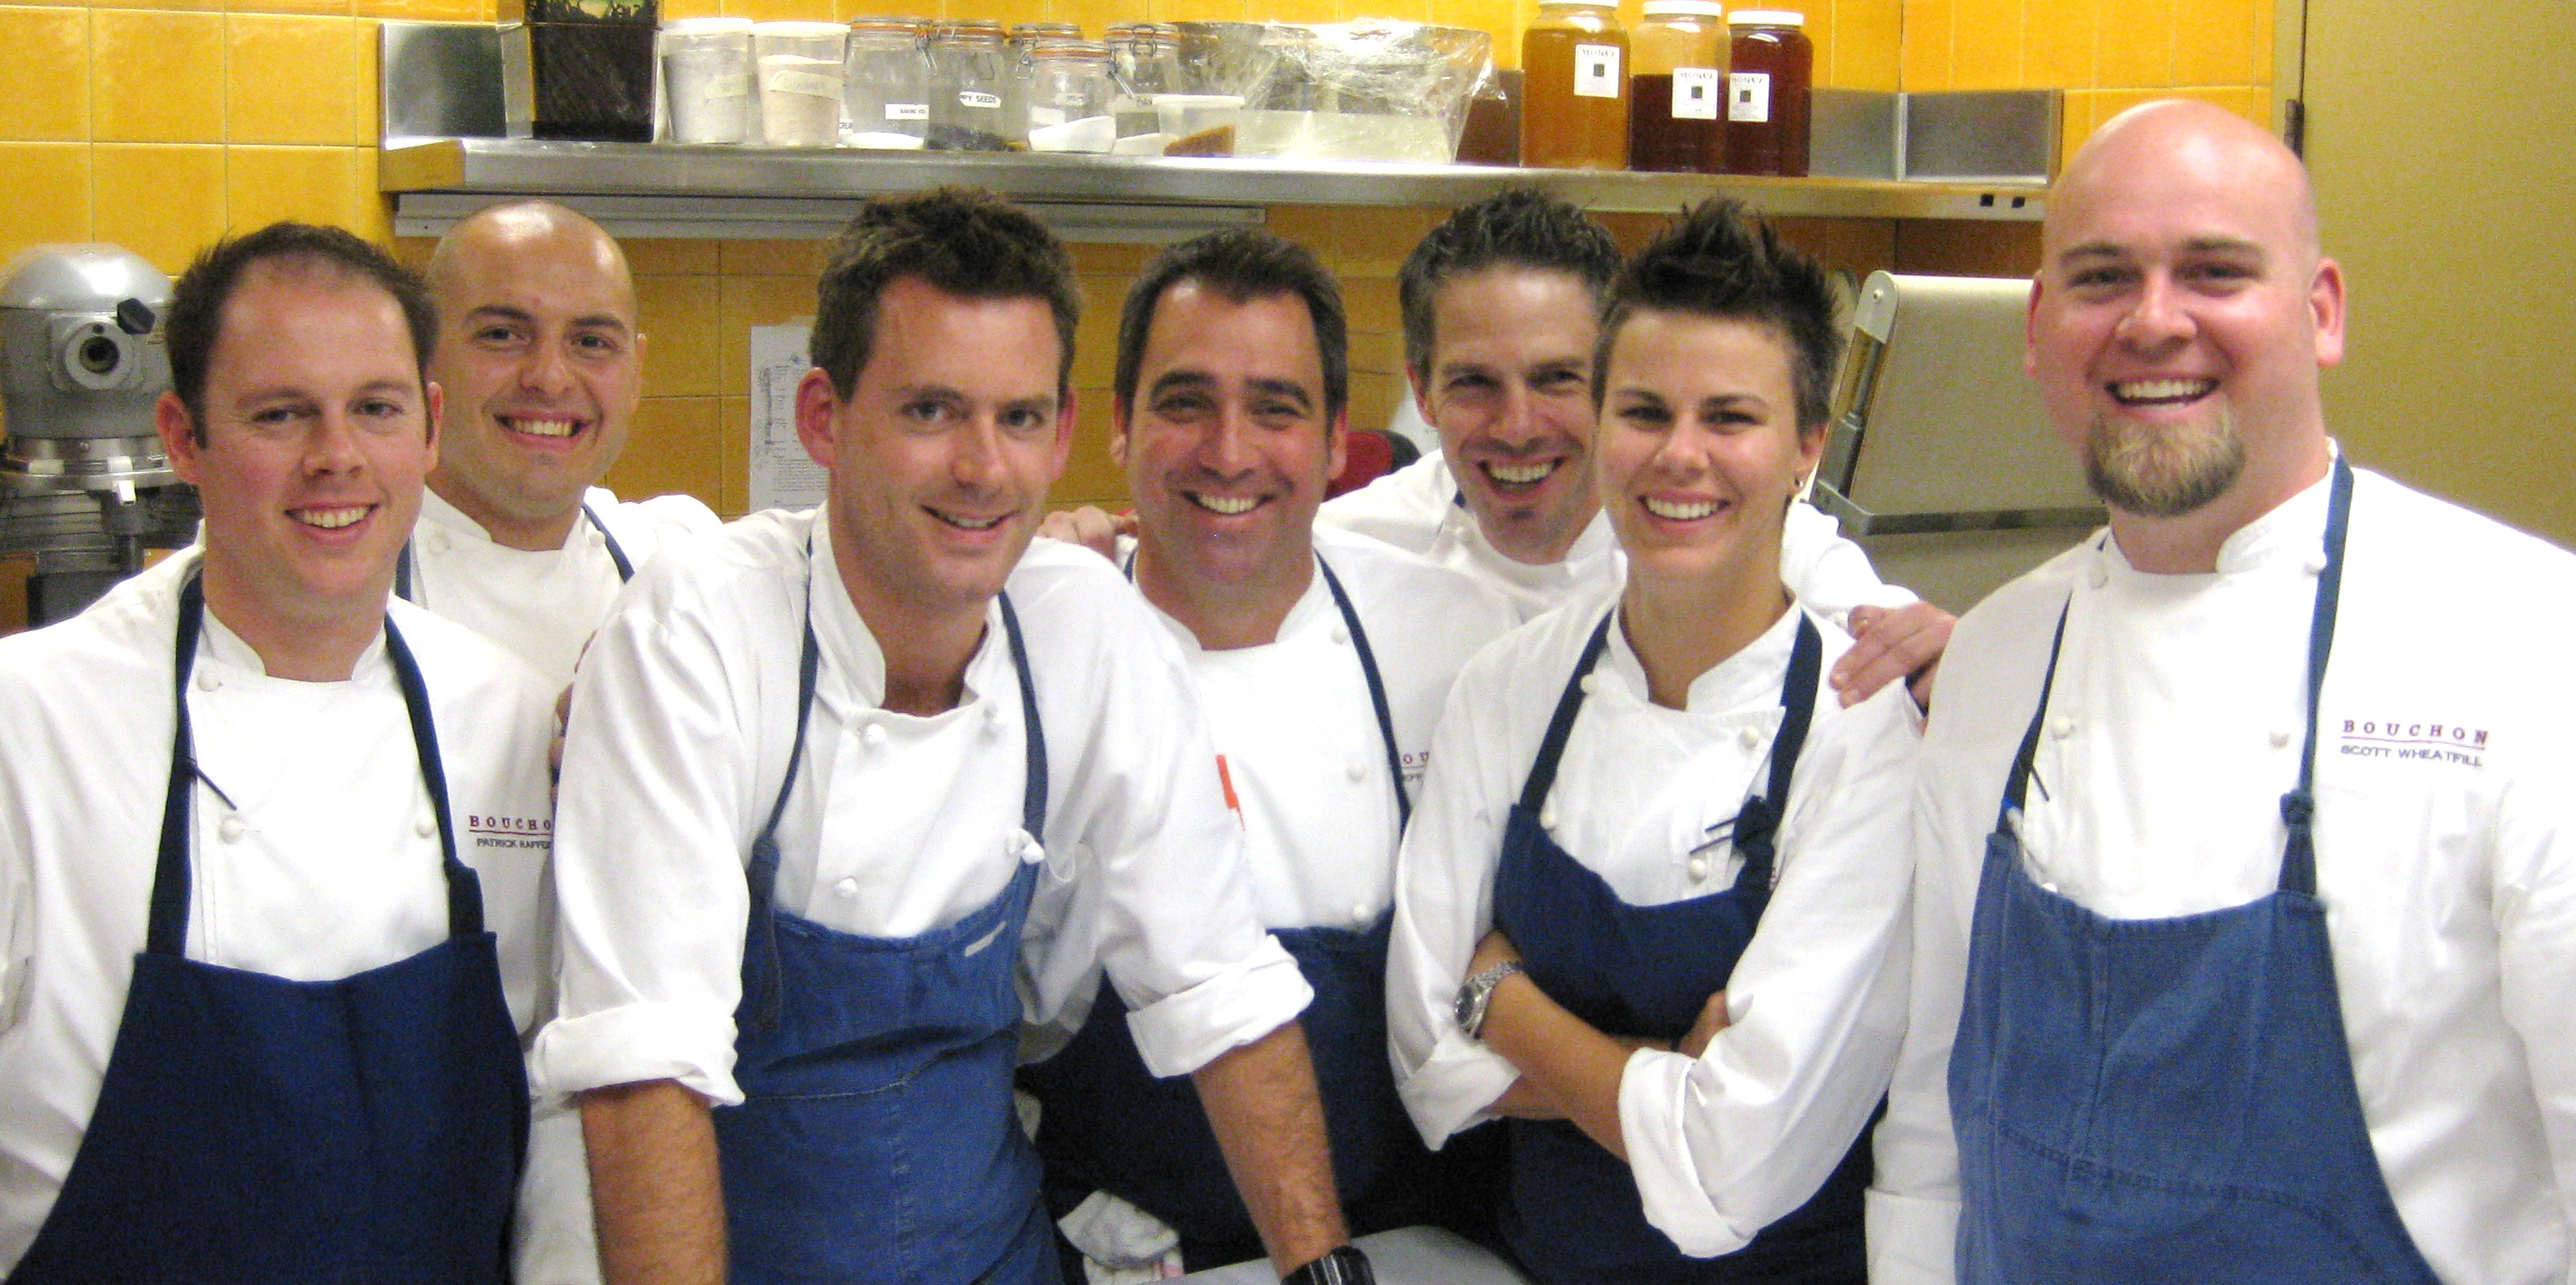 The chef team at Bouchon